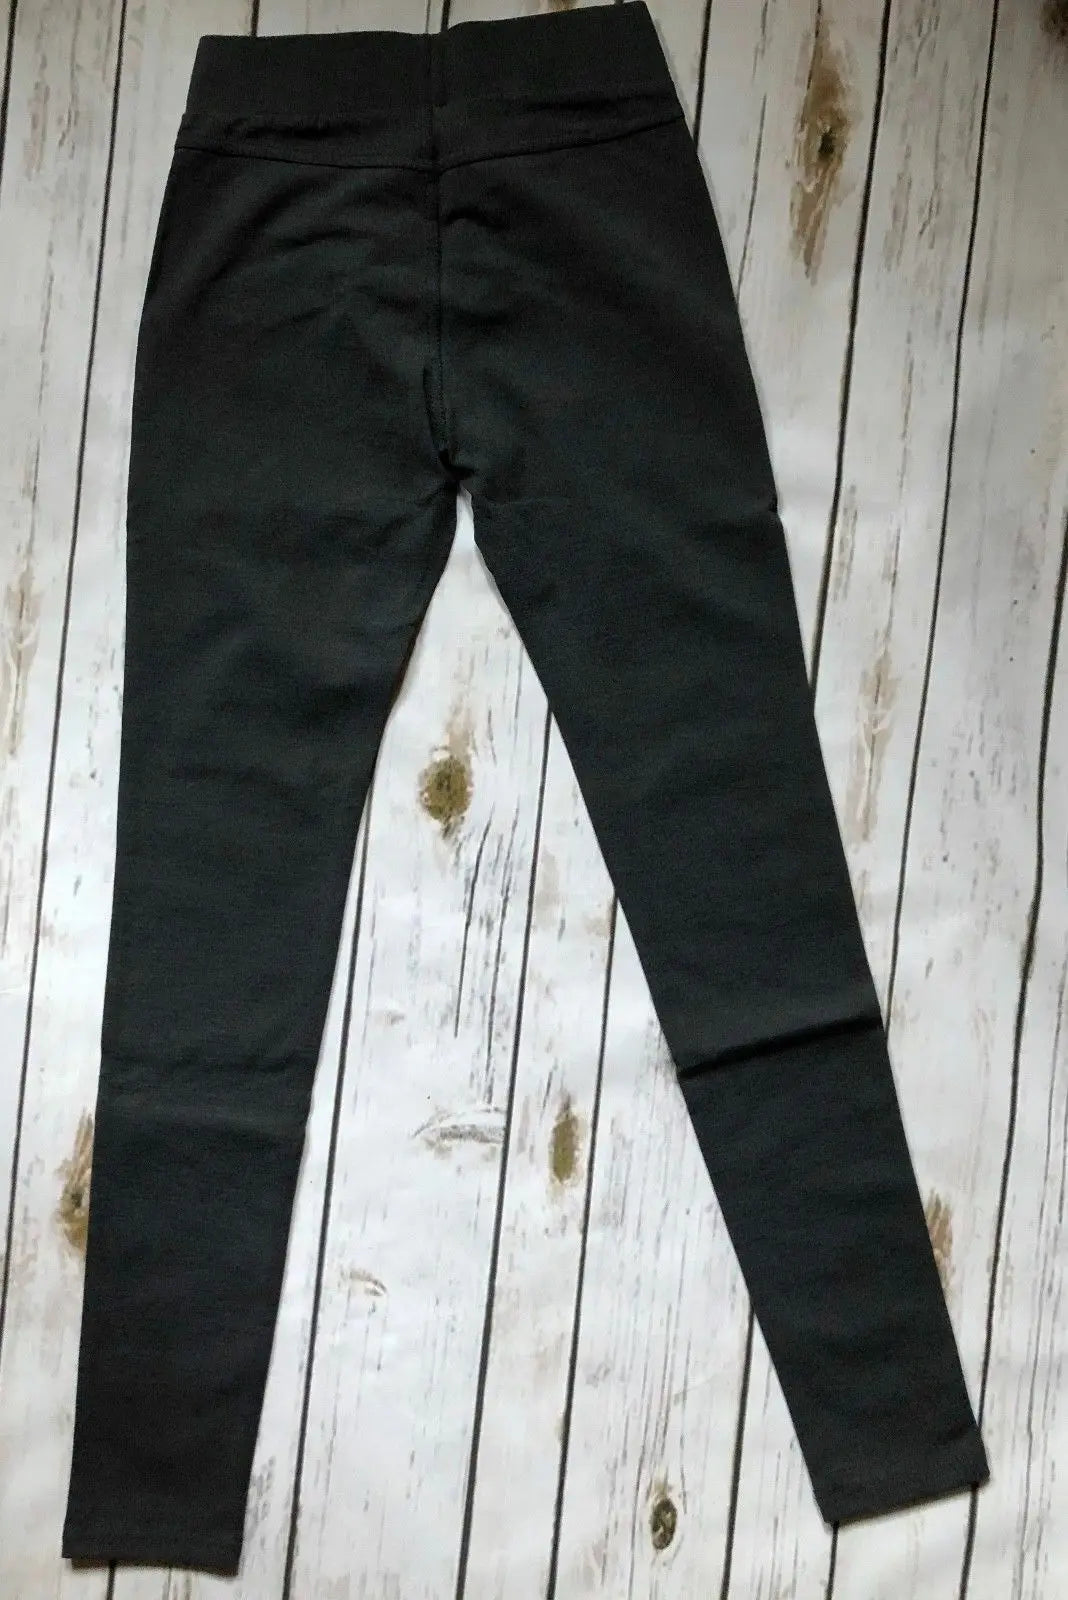 PUNK/ROCK/ STRETCH Ladies Leather-LOOK Front Quality Trousers/Leggings SIZE 8-14 Nina Carter